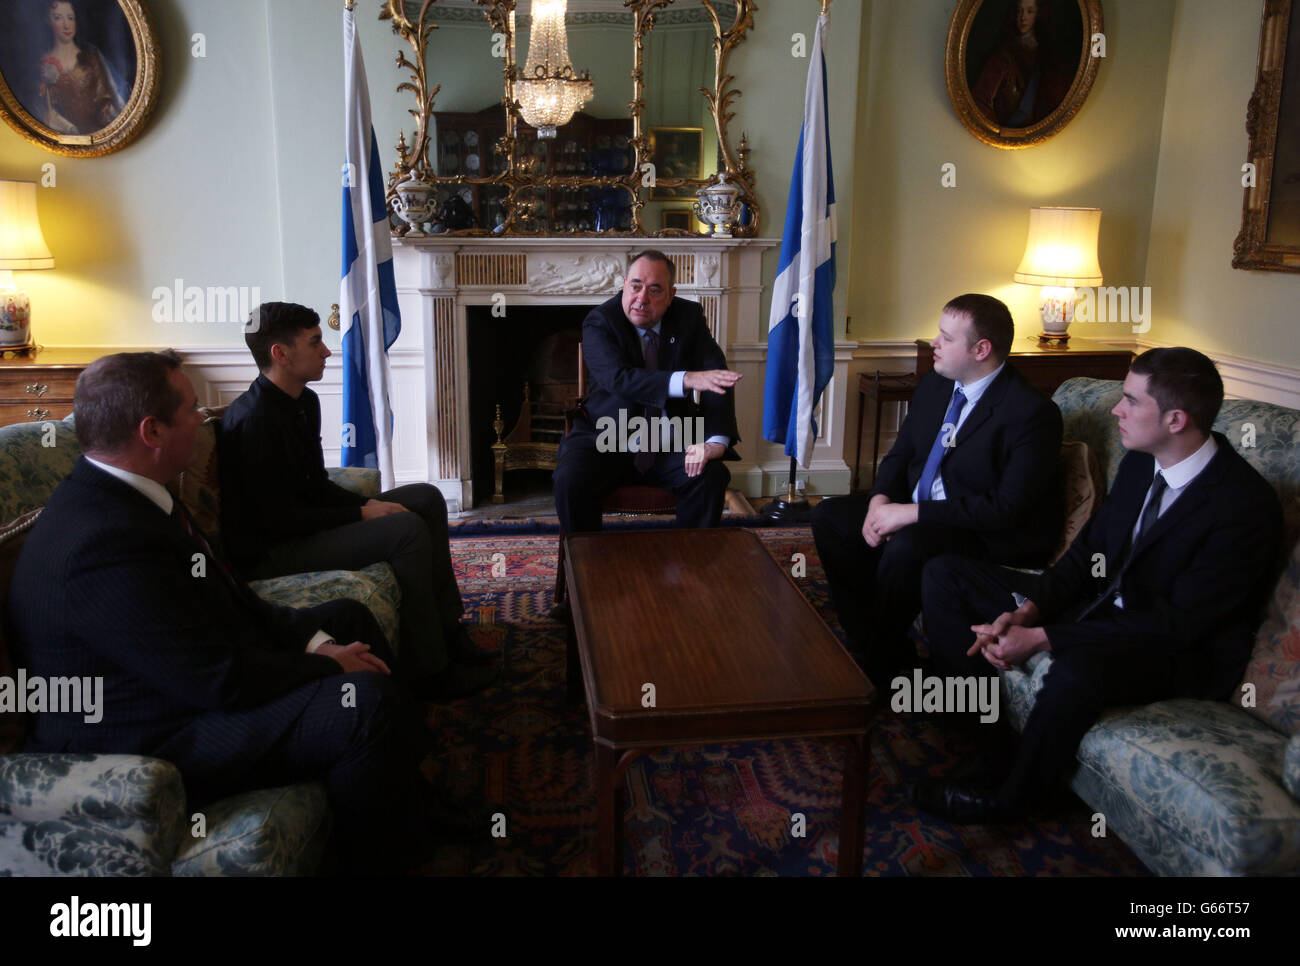 The Scottish First Minister Alex Salmond talks with apprentices from Steel Engineering at Bute House Edinburgh. Stock Photo